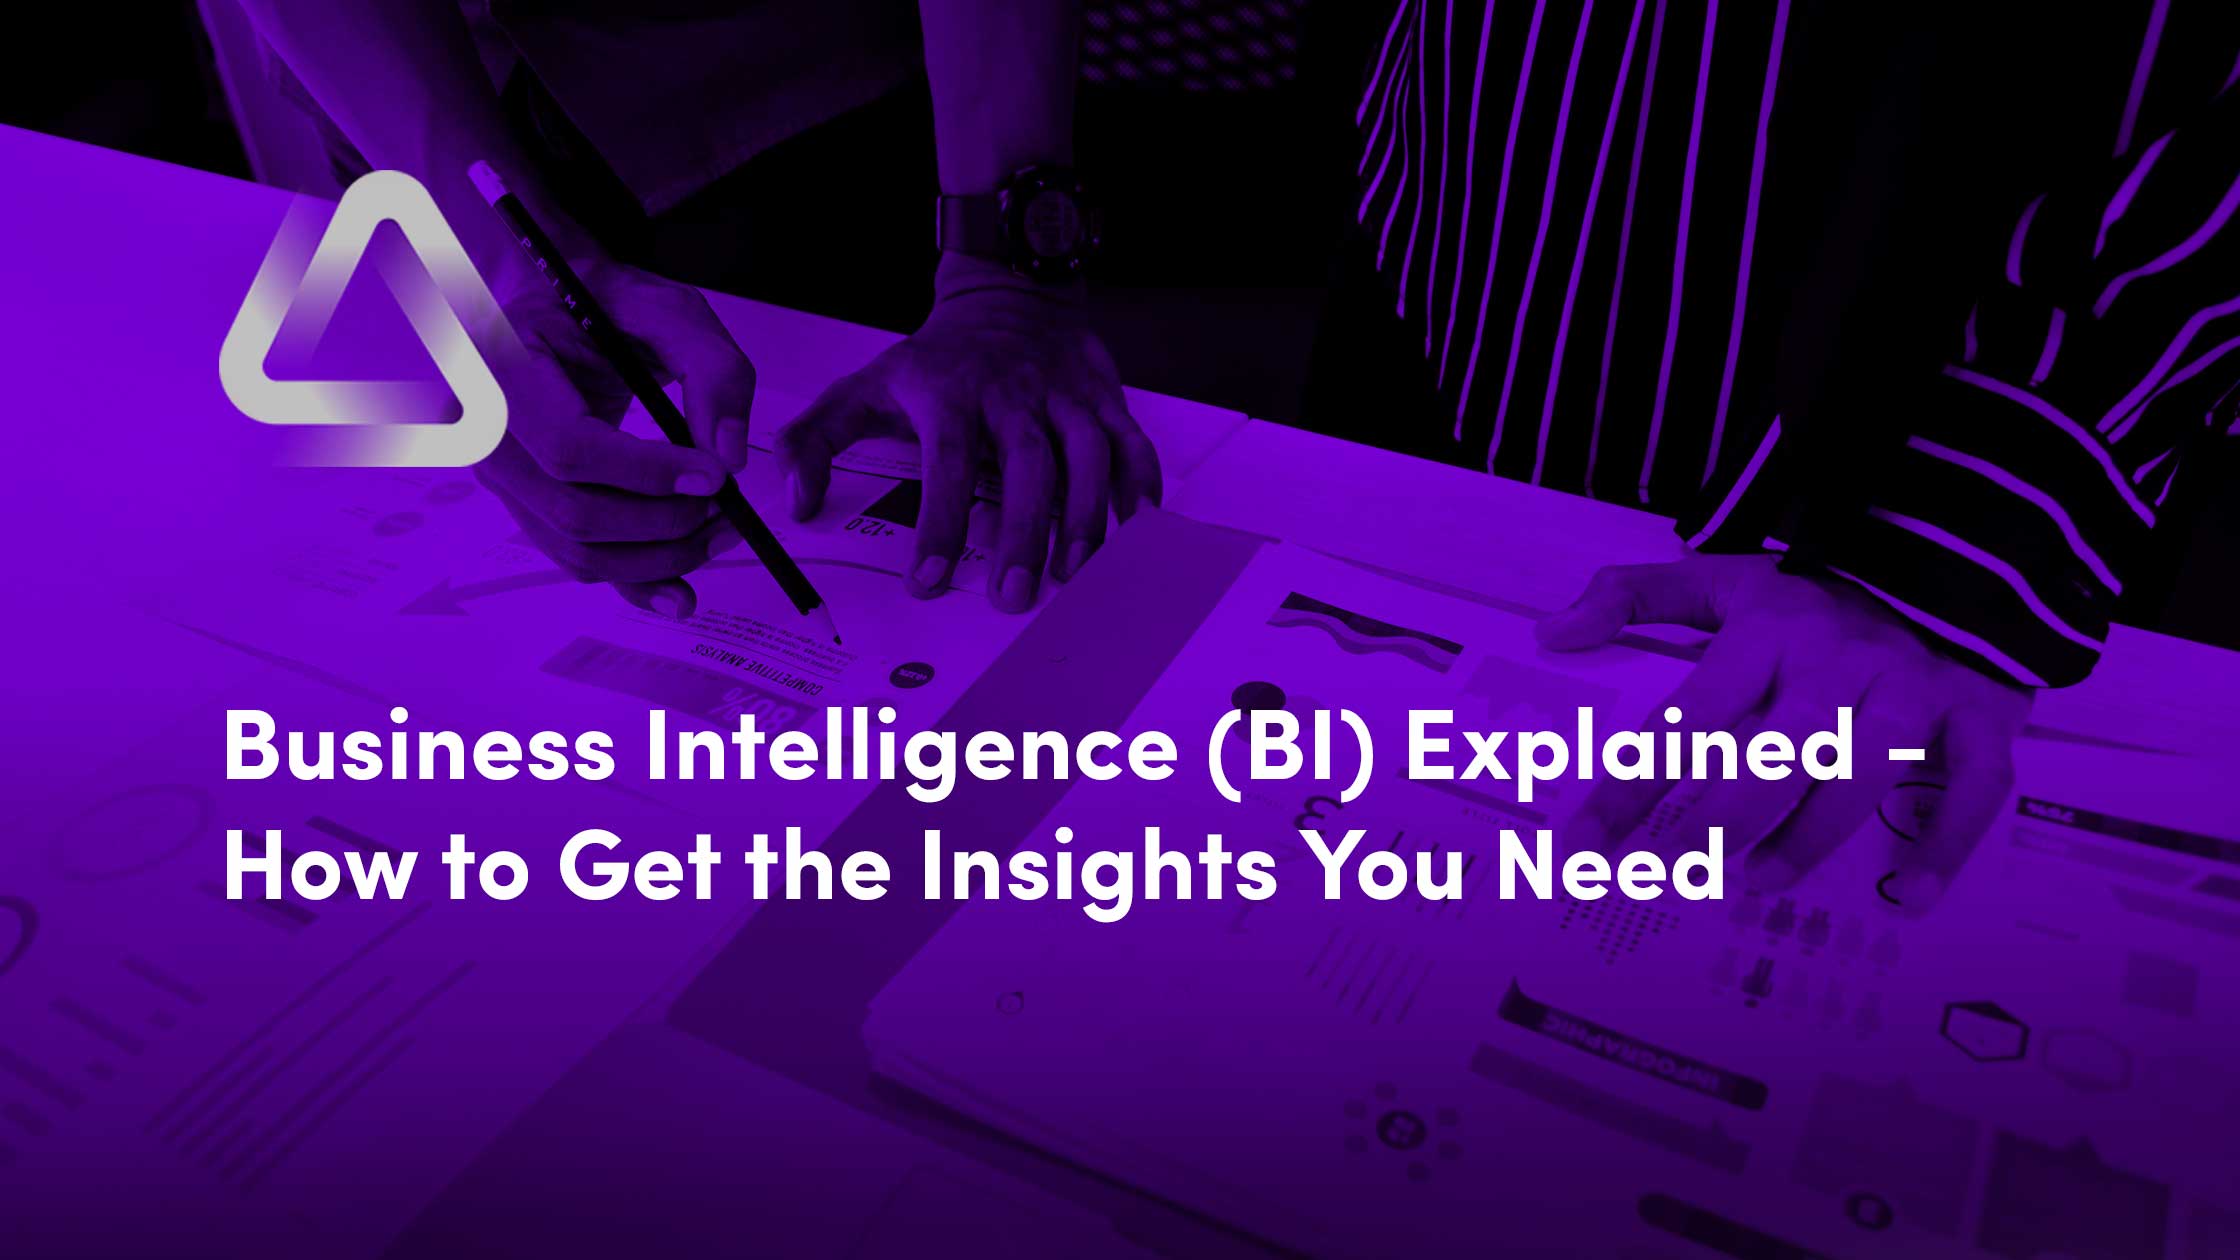 Business Intelligence (BI) Explained - How to Get the Insights You Need